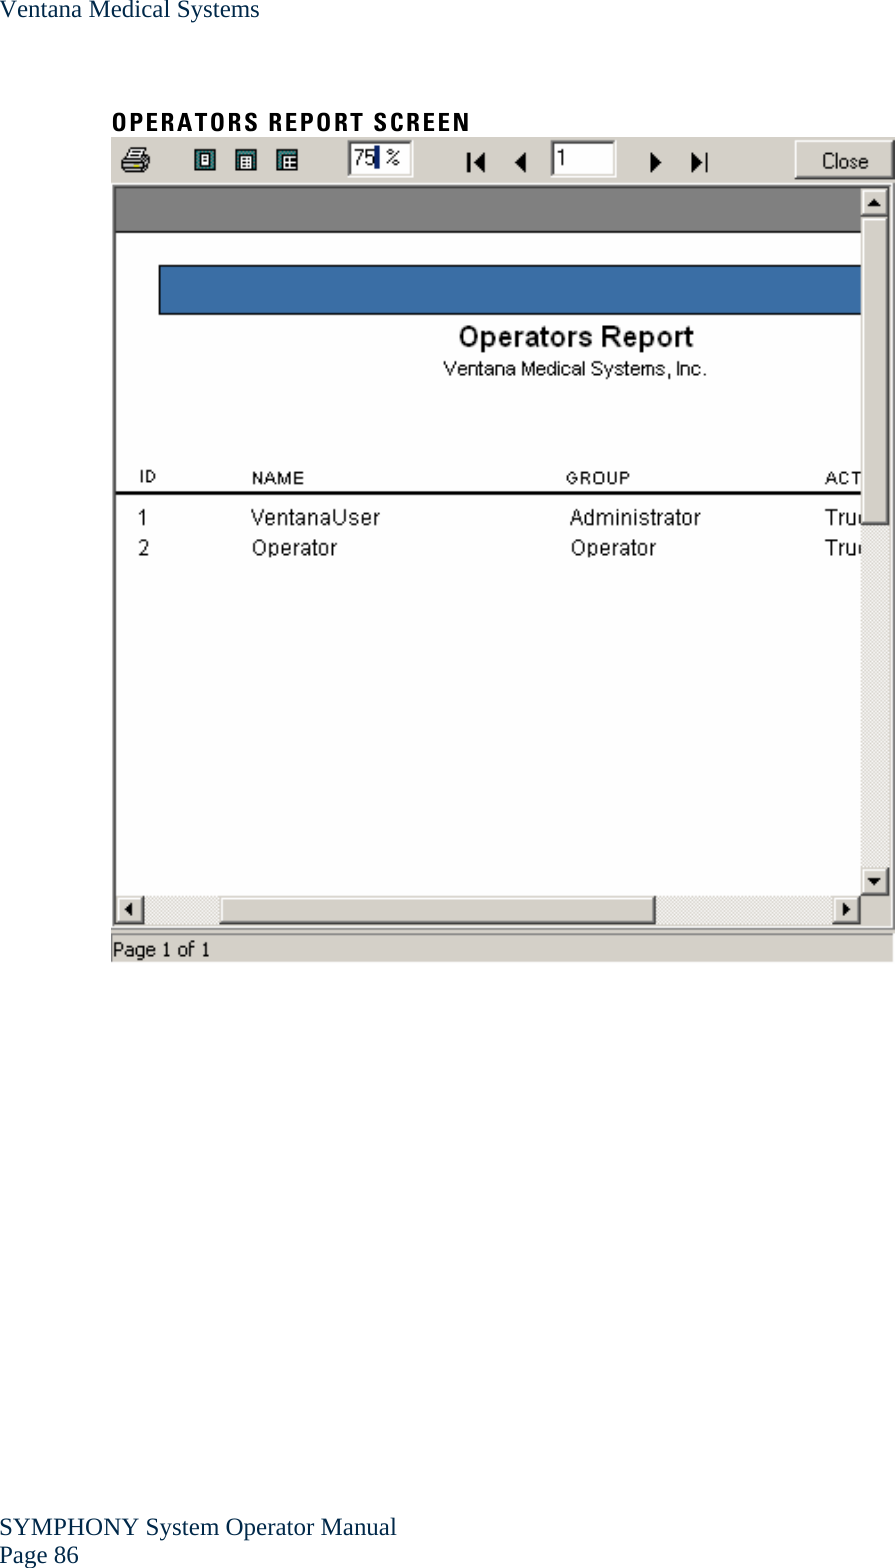 Ventana Medical Systems SYMPHONY System Operator Manual Page 86    OPERATORS REPORT SCREEN     